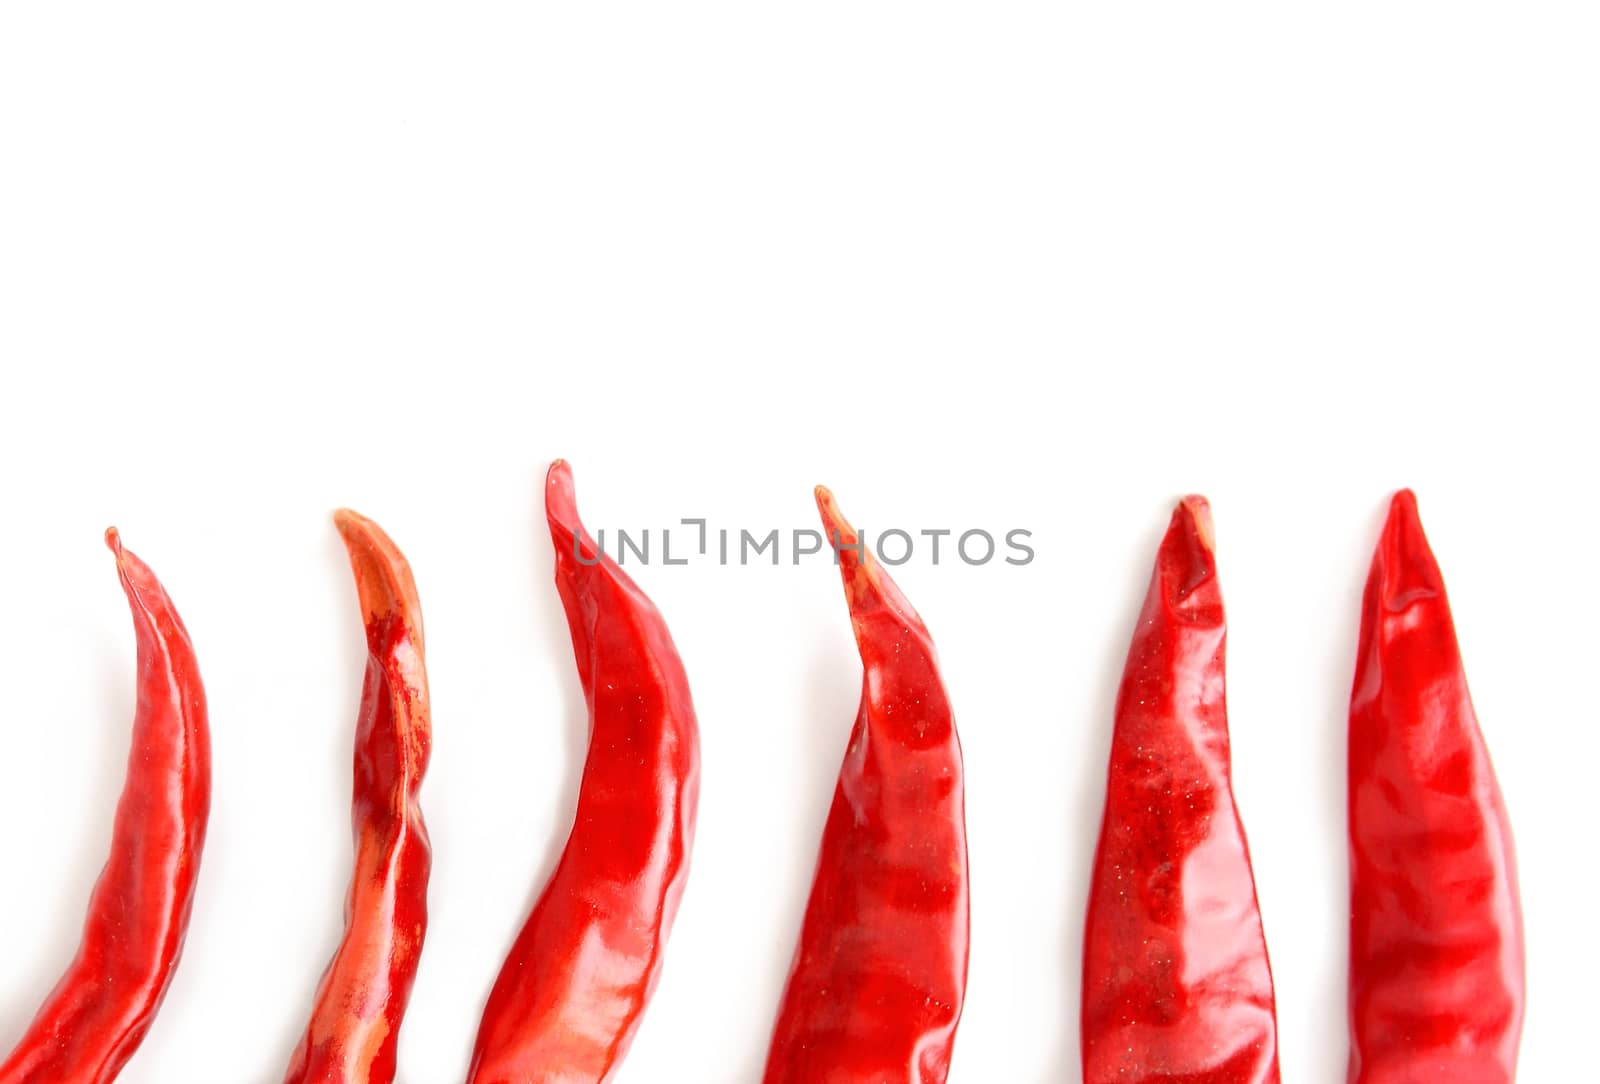 Top view of dried red hot chilli peppers halves arranged in a row. It looks like a chilli flames on white background with copy space on upper side.